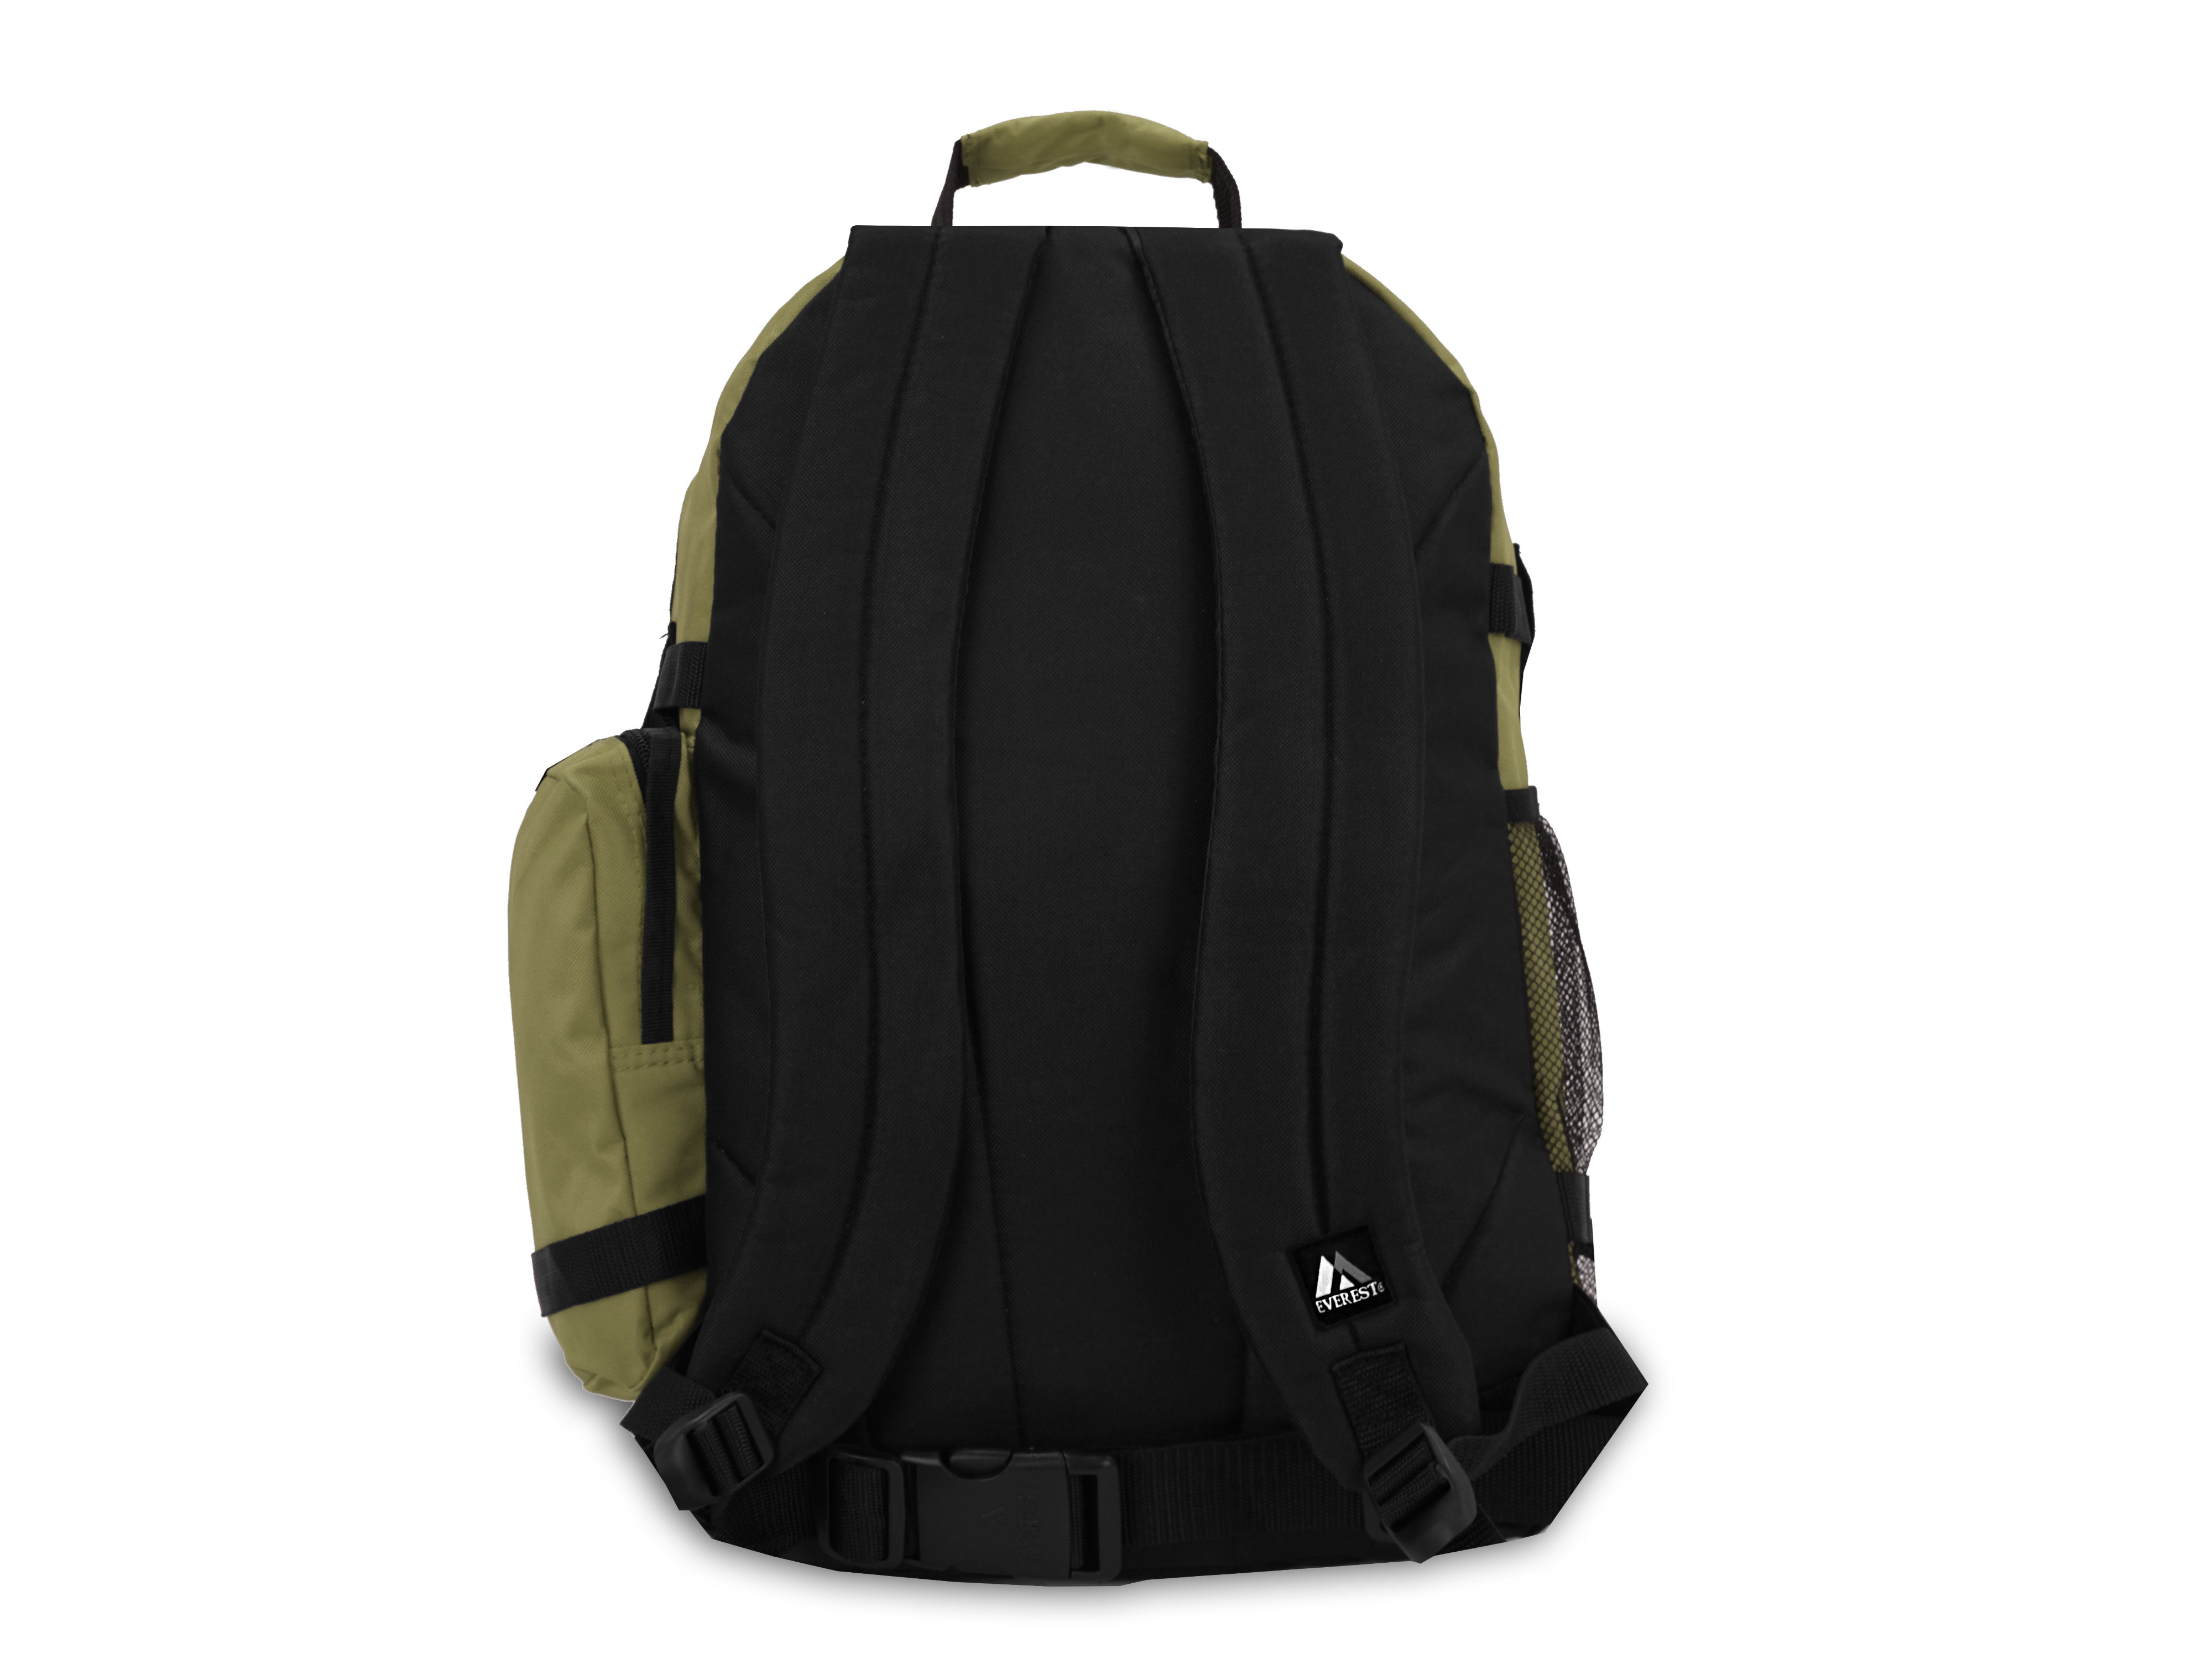 Everest 20" Oversized Deluxe Backpack, Olive All Ages, Unisex 3045R-OLI/BK, Carrier and Shoulder Book Bag for School, Work, Sports, and Travel - image 3 of 5